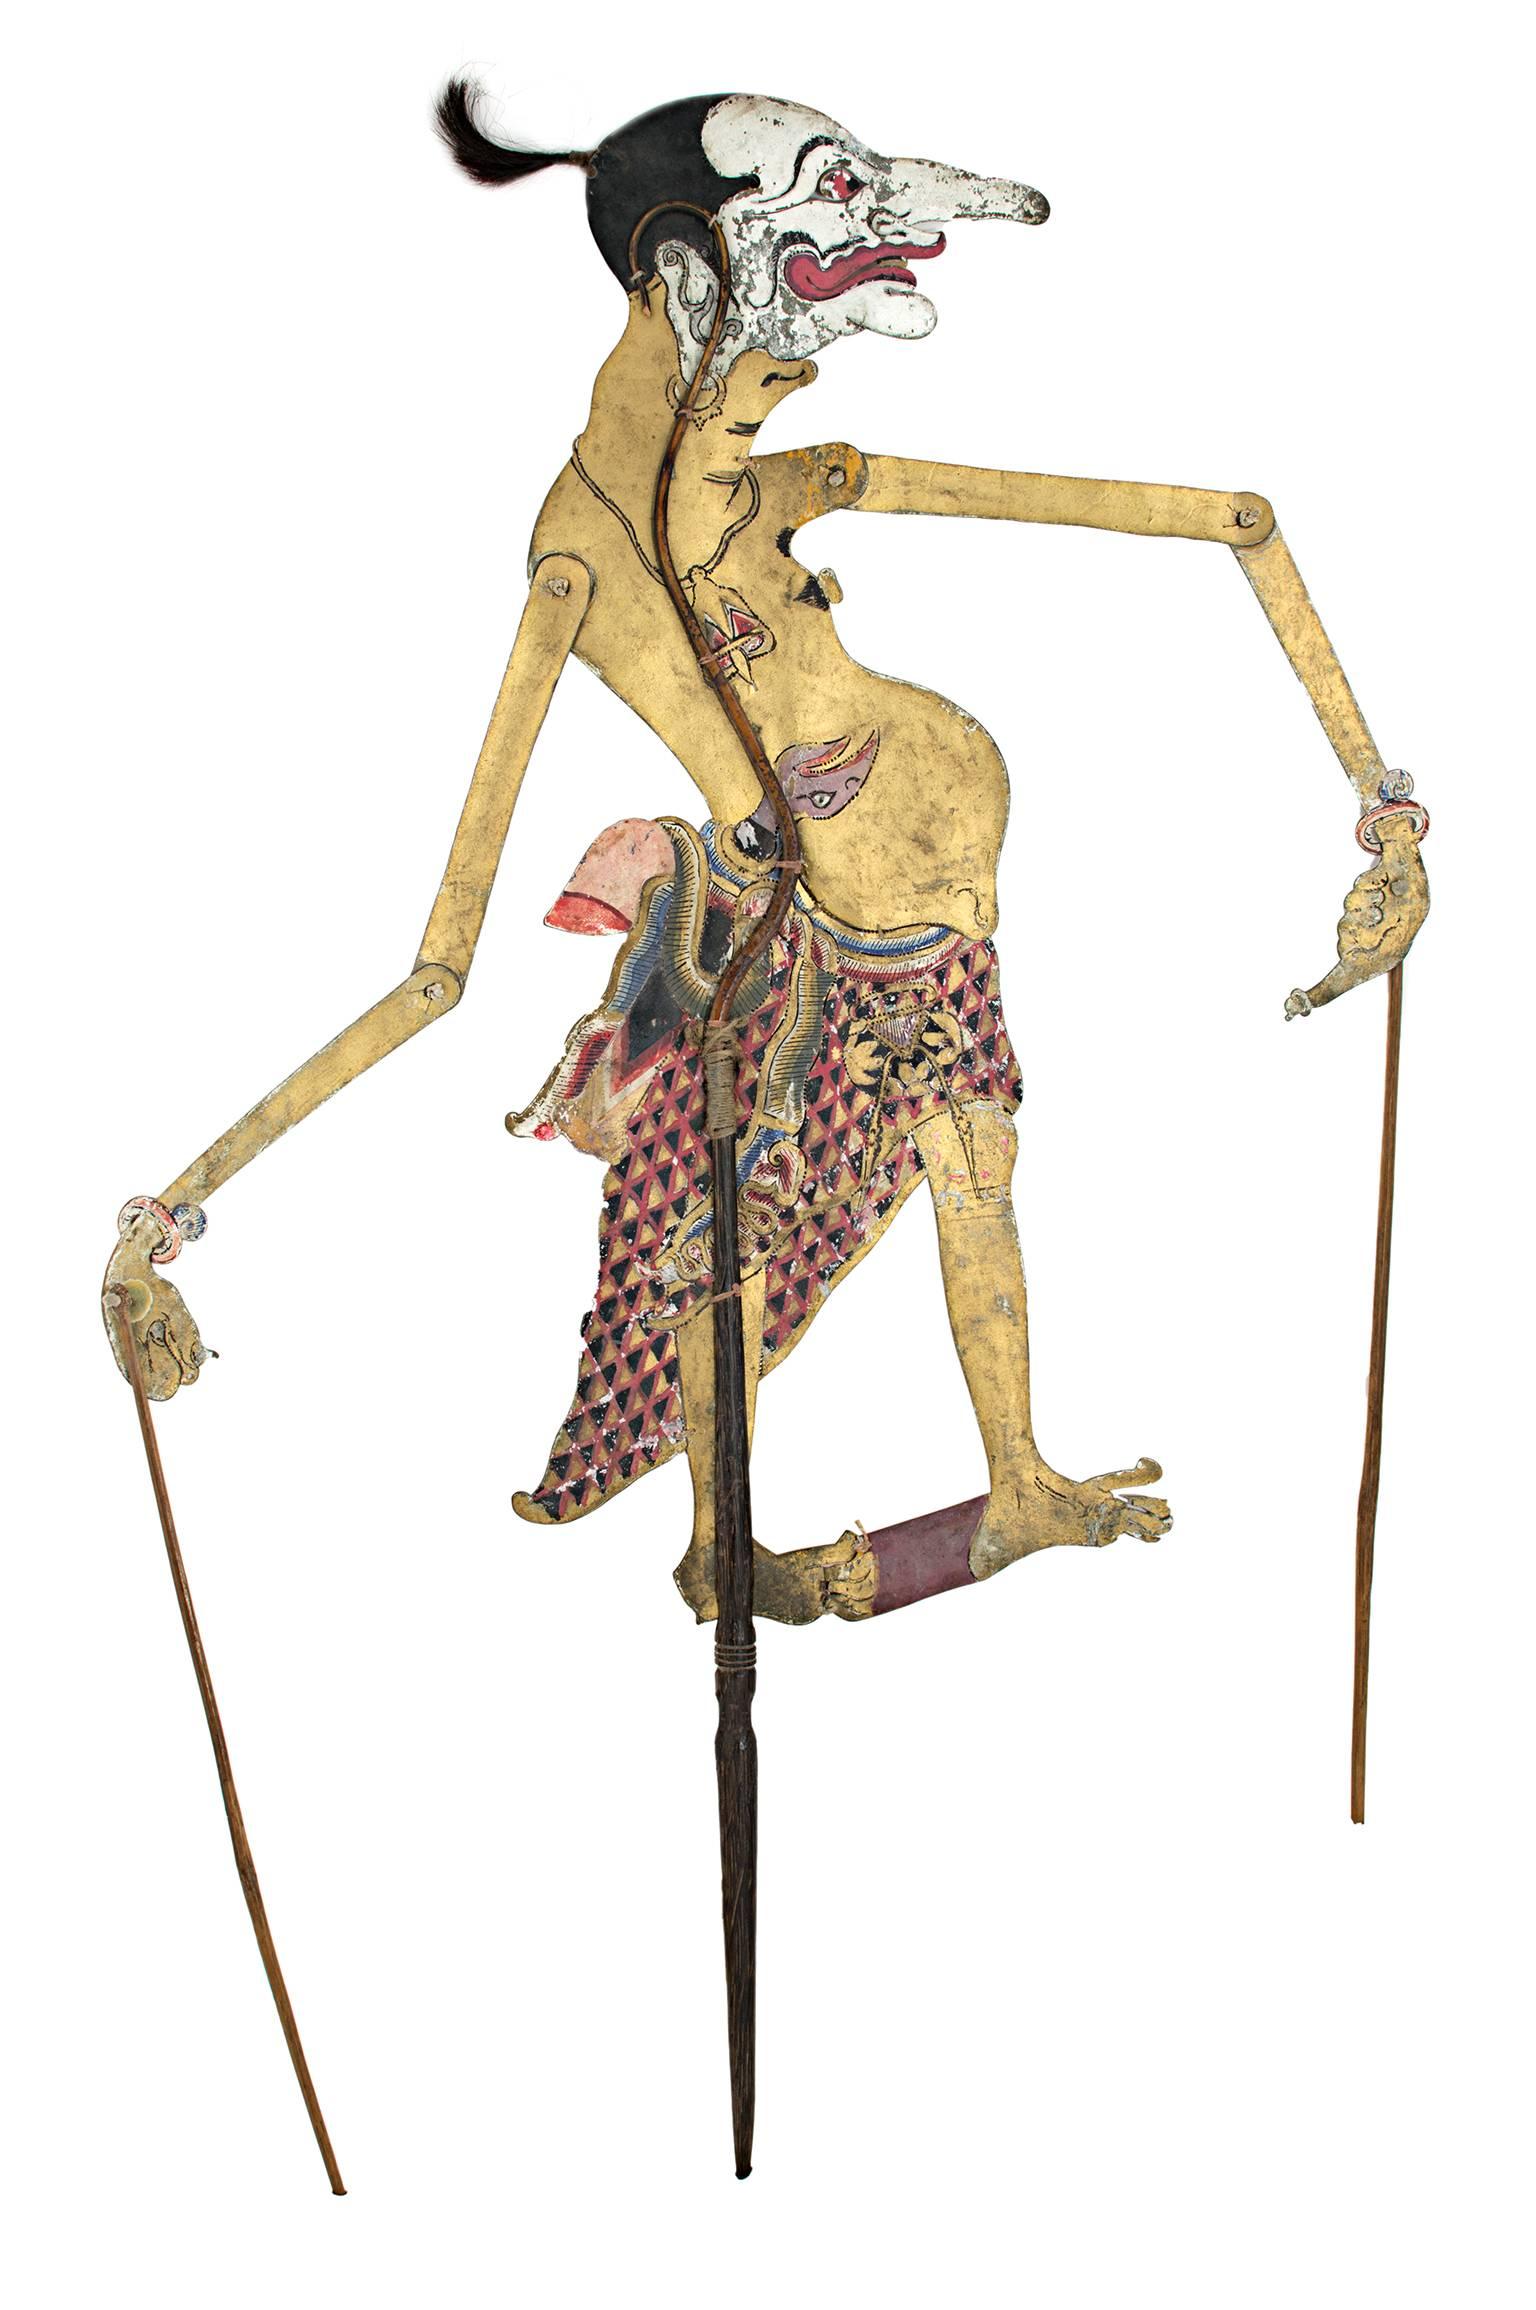 Unknown Figurative Sculpture - "Indonesian Shadow Puppet, " Wood and Leather created in Indonesia c. 1800s 